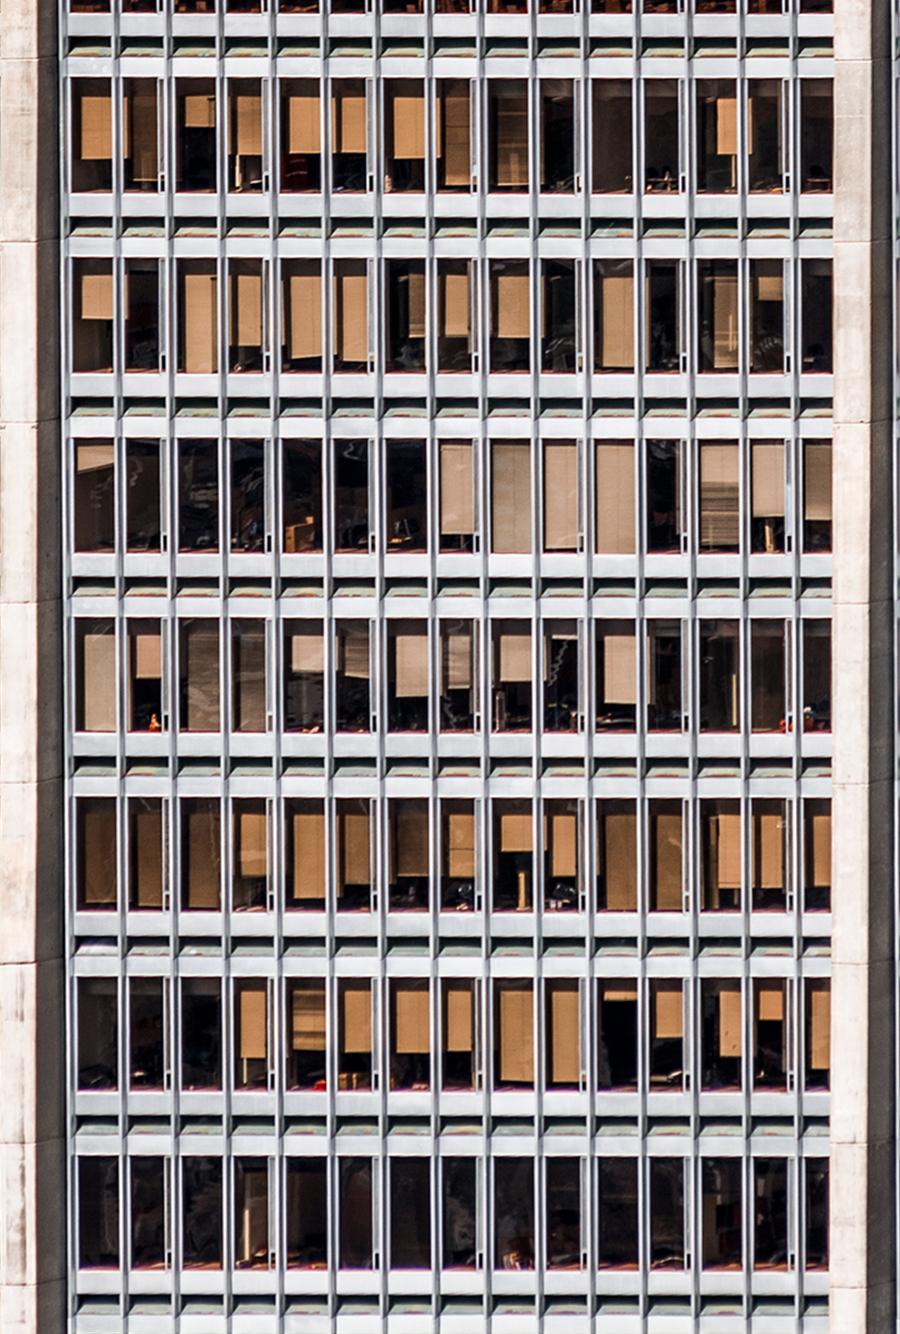 1003 Windows. Abstract architectural  landscape color photograph  - Contemporary Photograph by Javier Rey